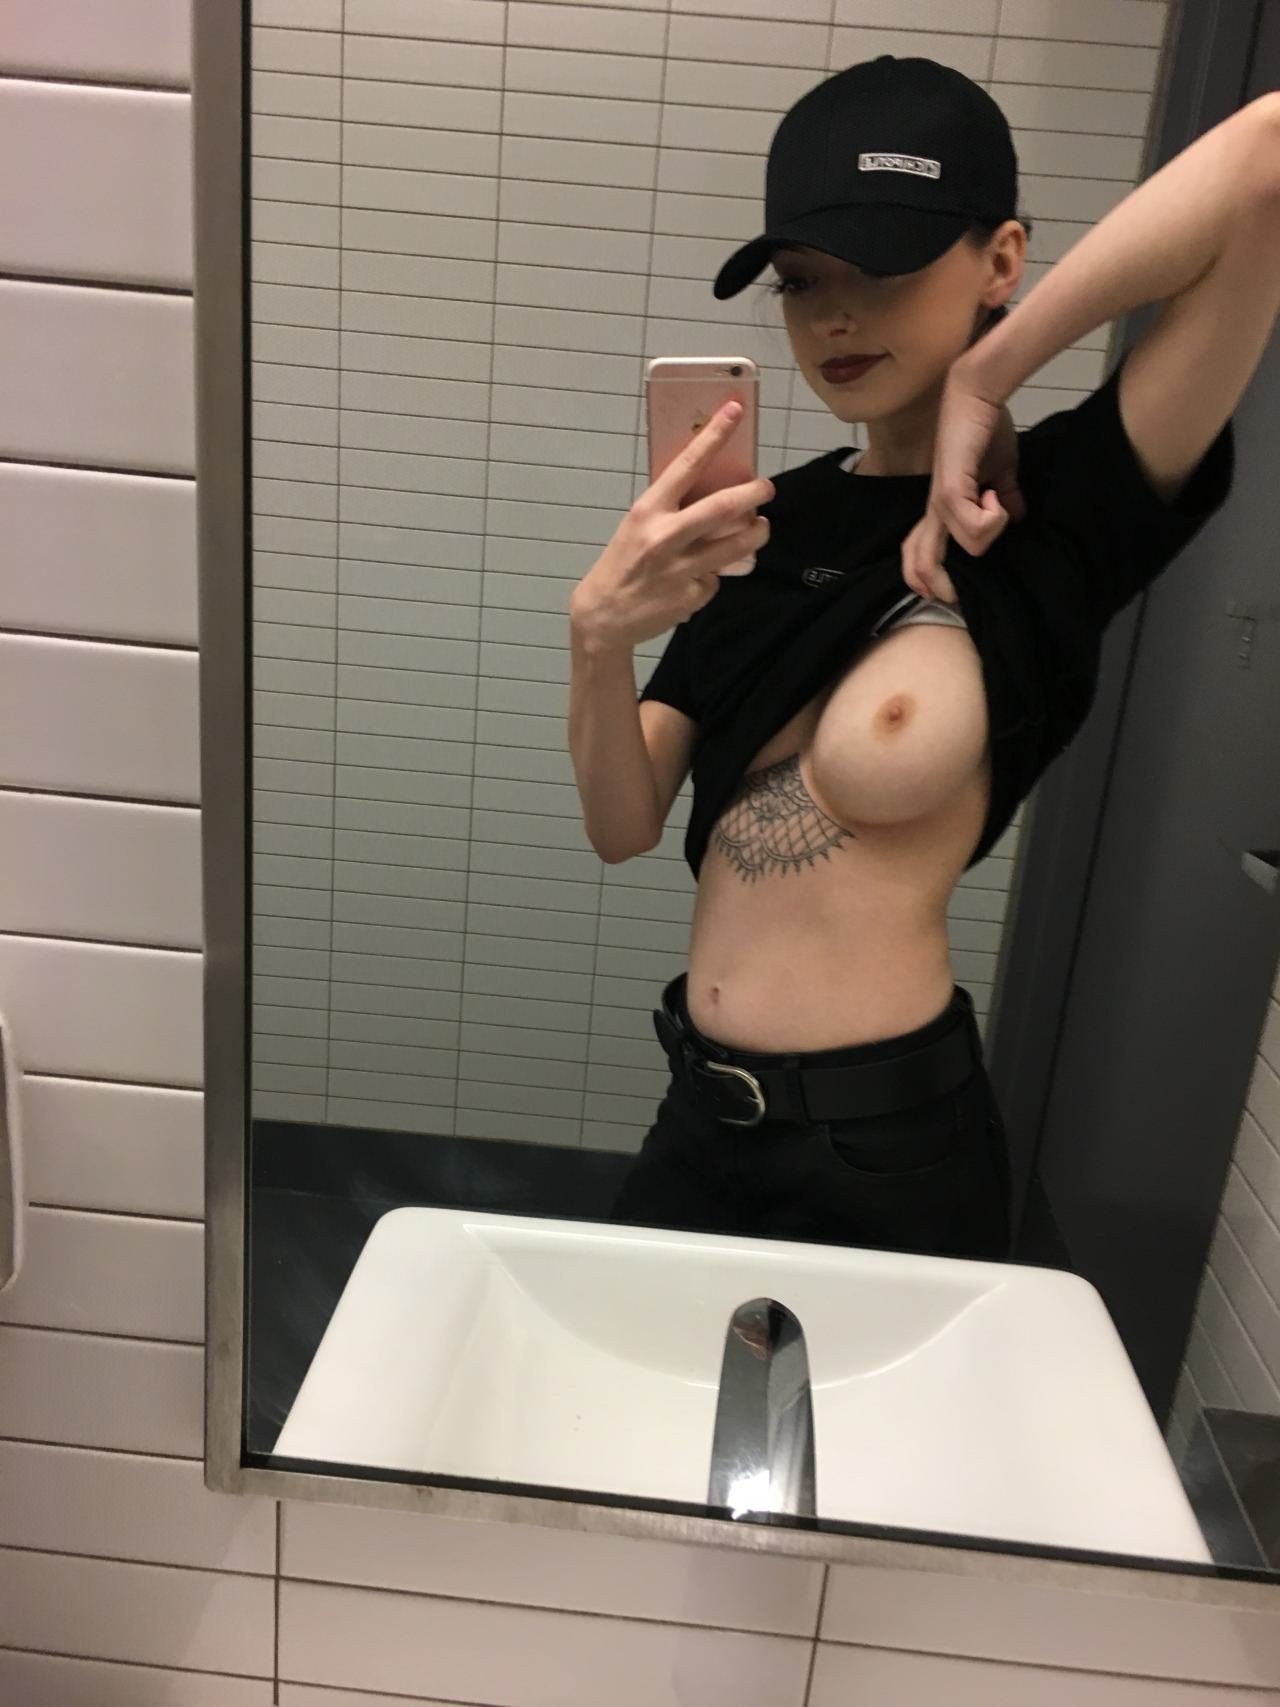 Photo by Hornyasf2715 with the username @Hornyasf2715,  September 21, 2020 at 4:41 PM. The post is about the topic Nudes at work